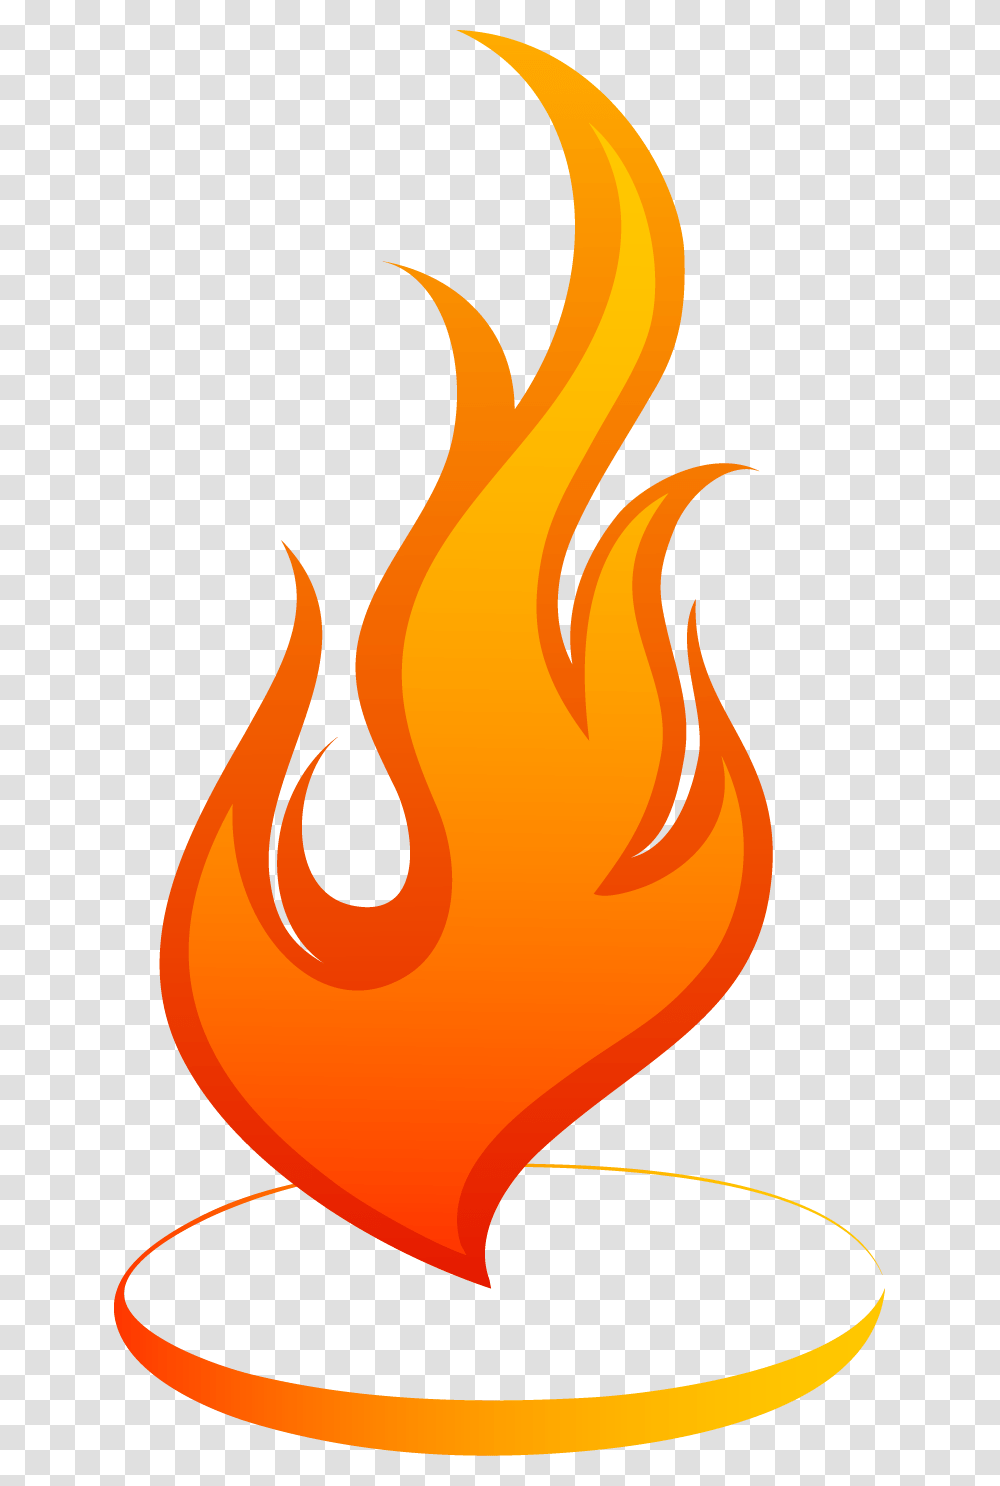 Explosion Fiery Fireball Flaming Flammable Frame Frame Of Fire, Flame, Bonfire Transparent Png